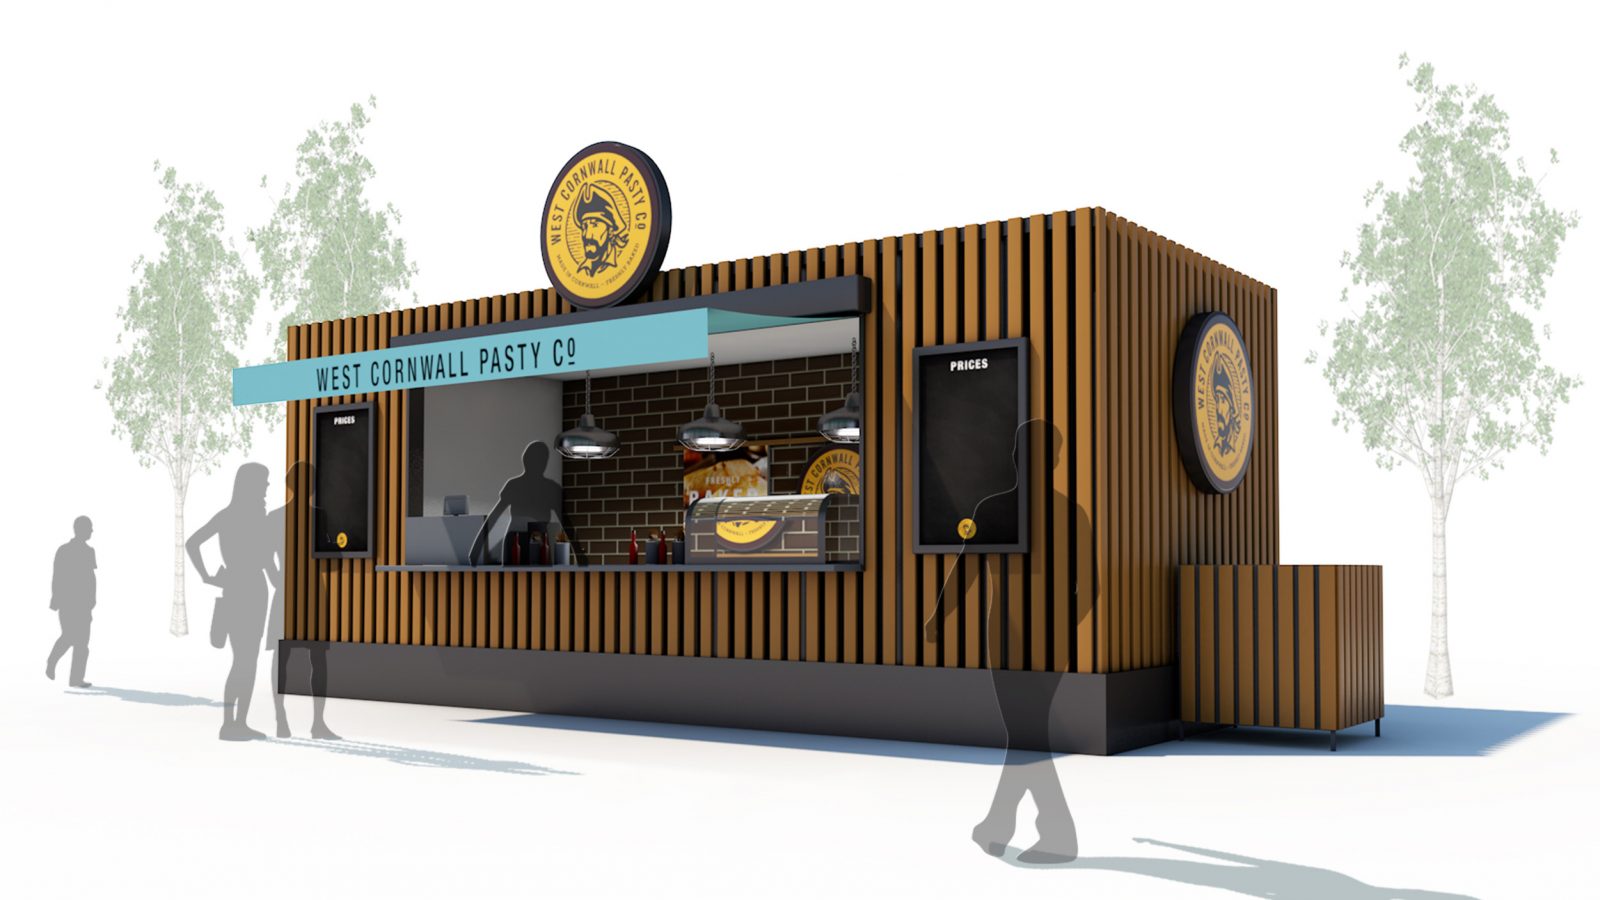 3D CGI Render of event food stall created by Celf Creative